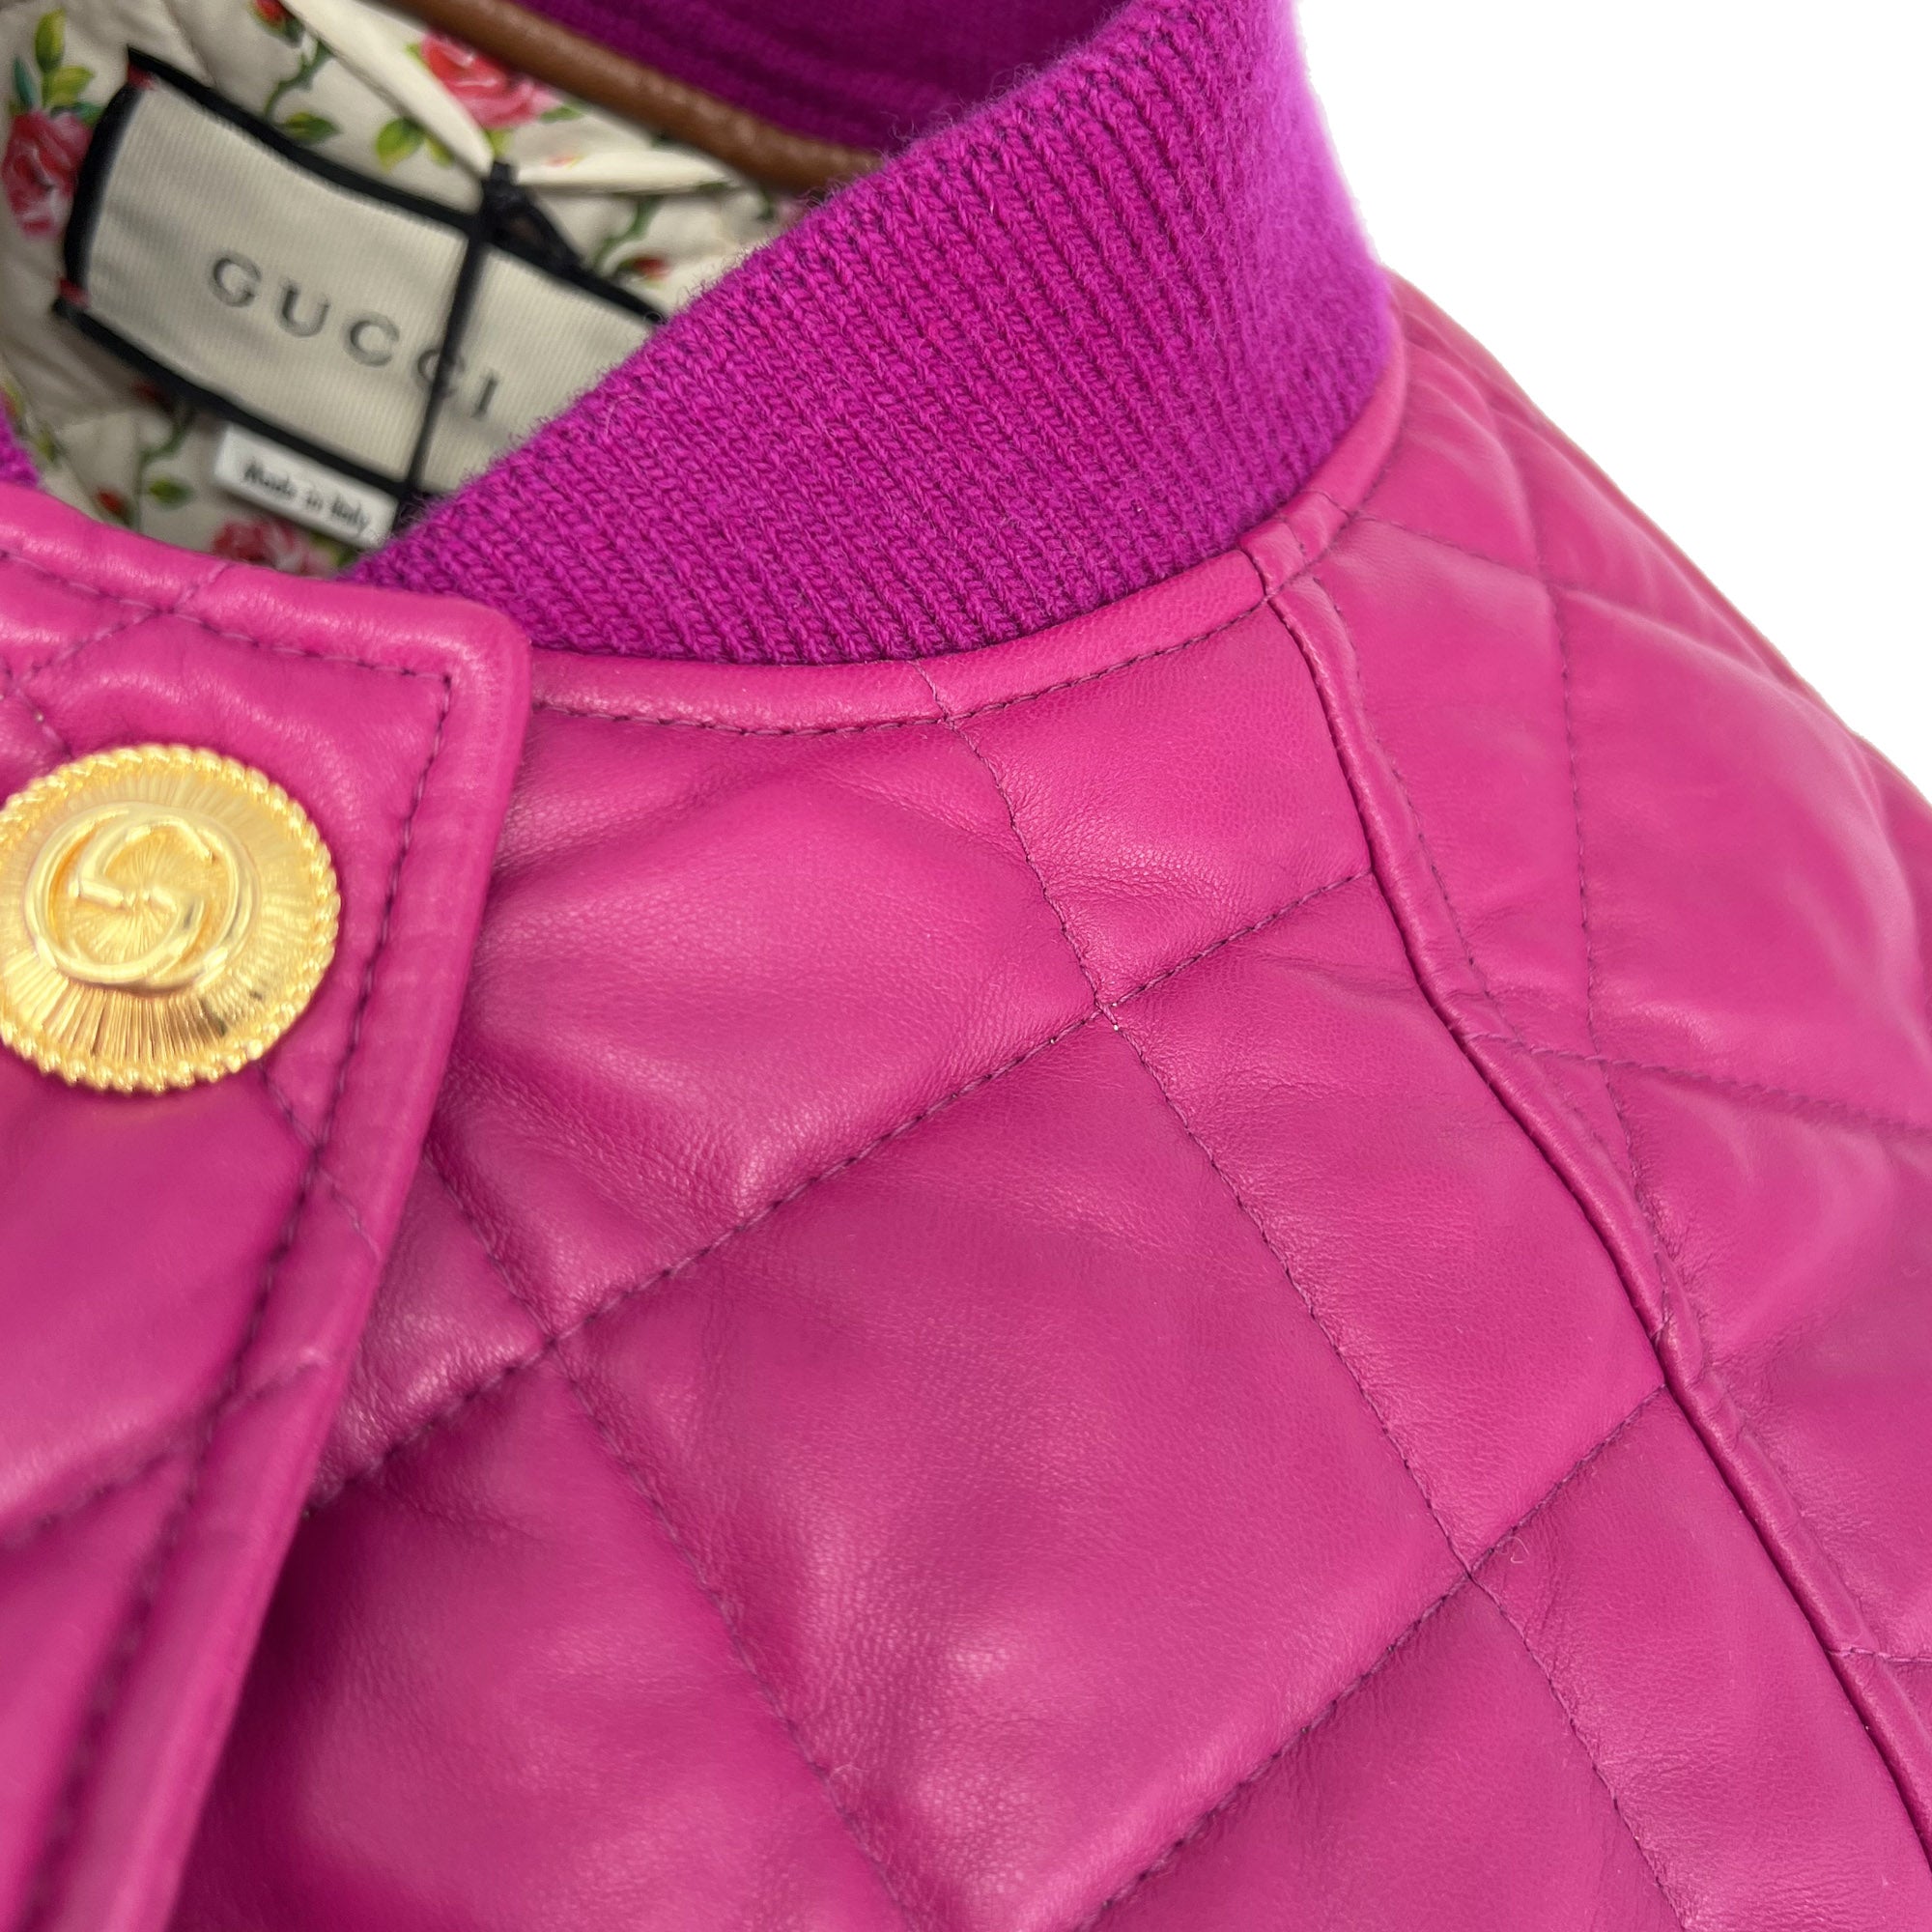 Gucci Quilted Bomber Jacket